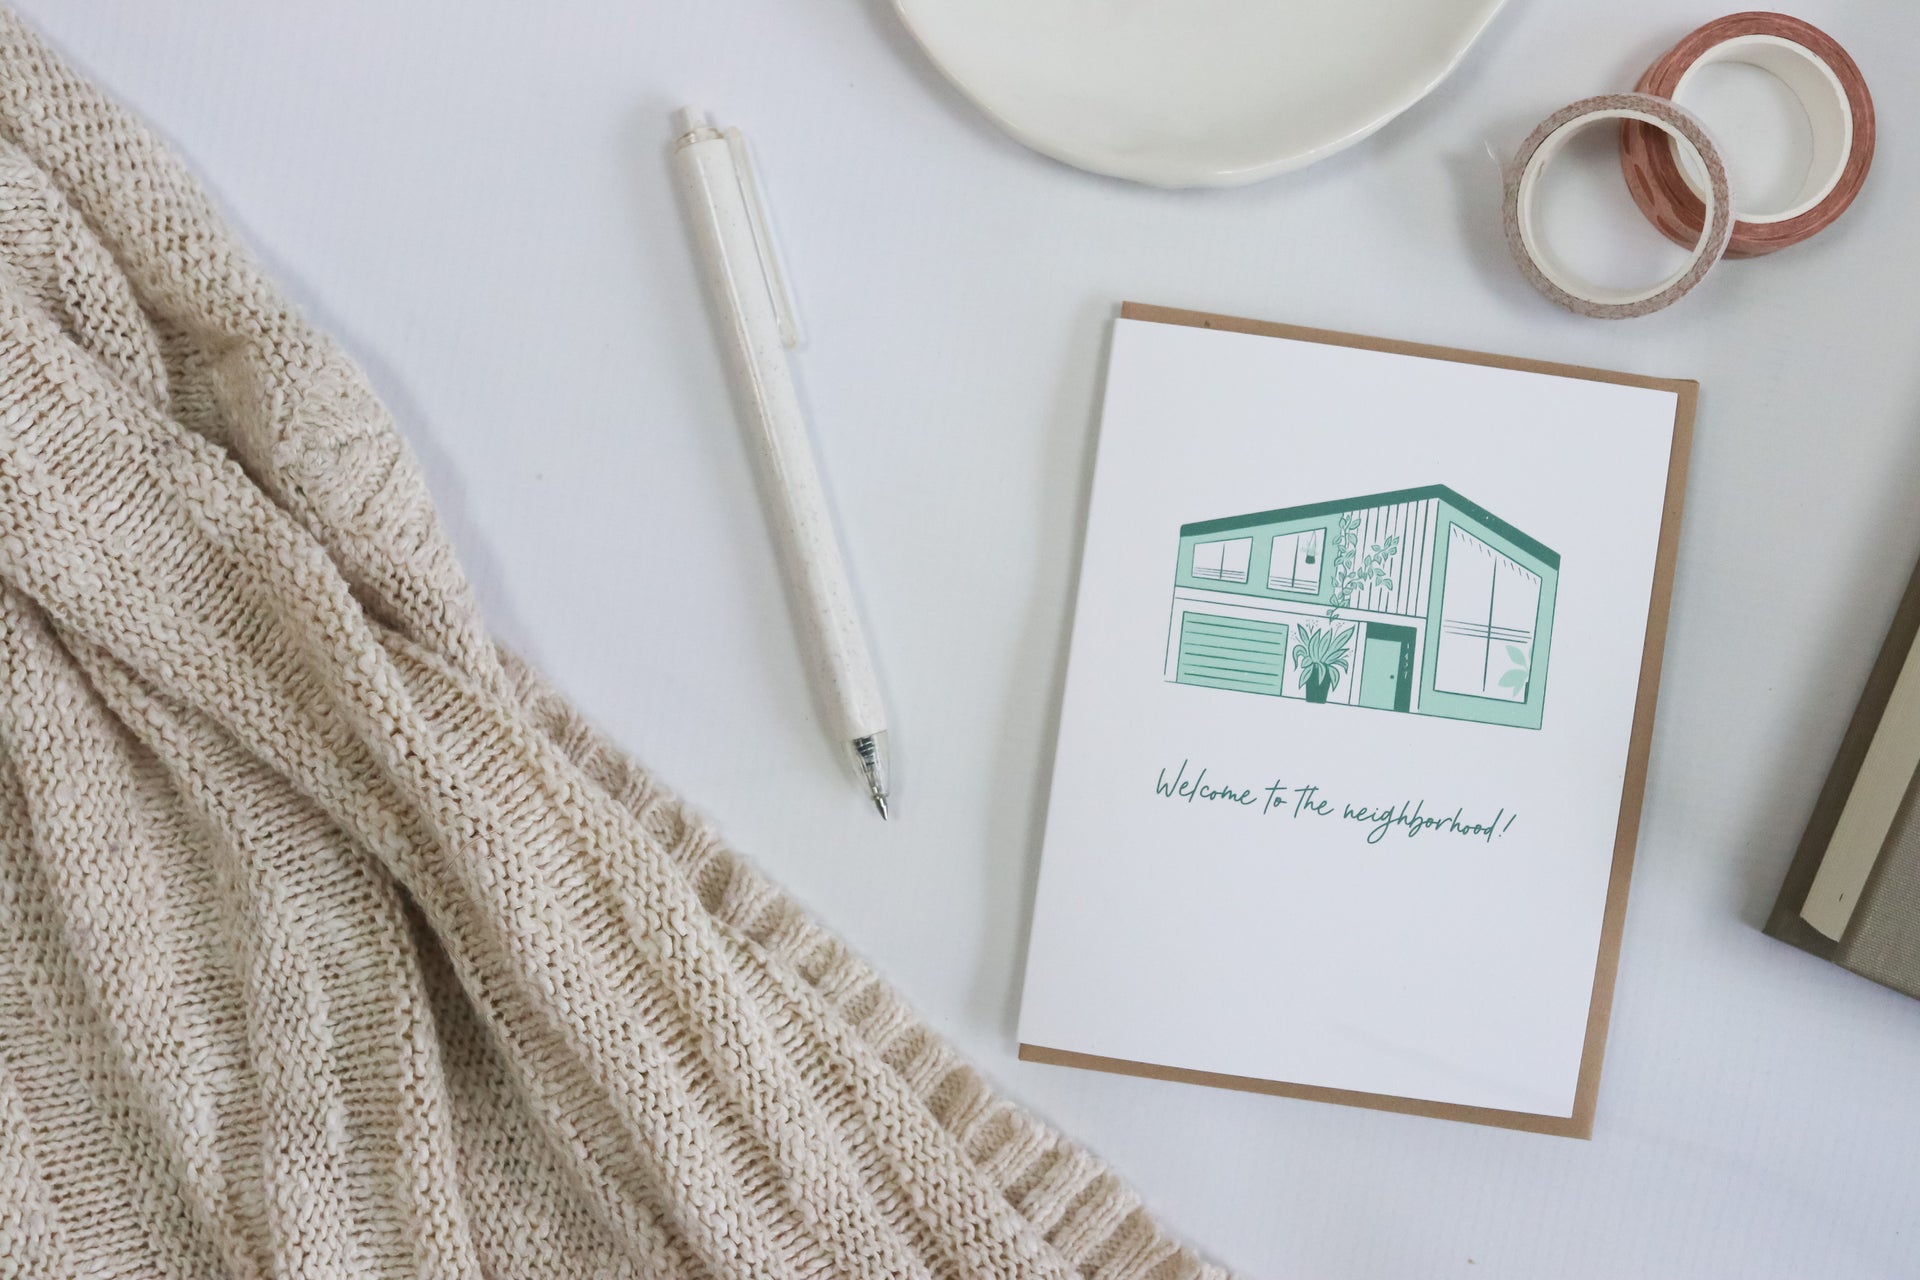 5 Greeting Cards to Welcome & Connect with Your Neighbors